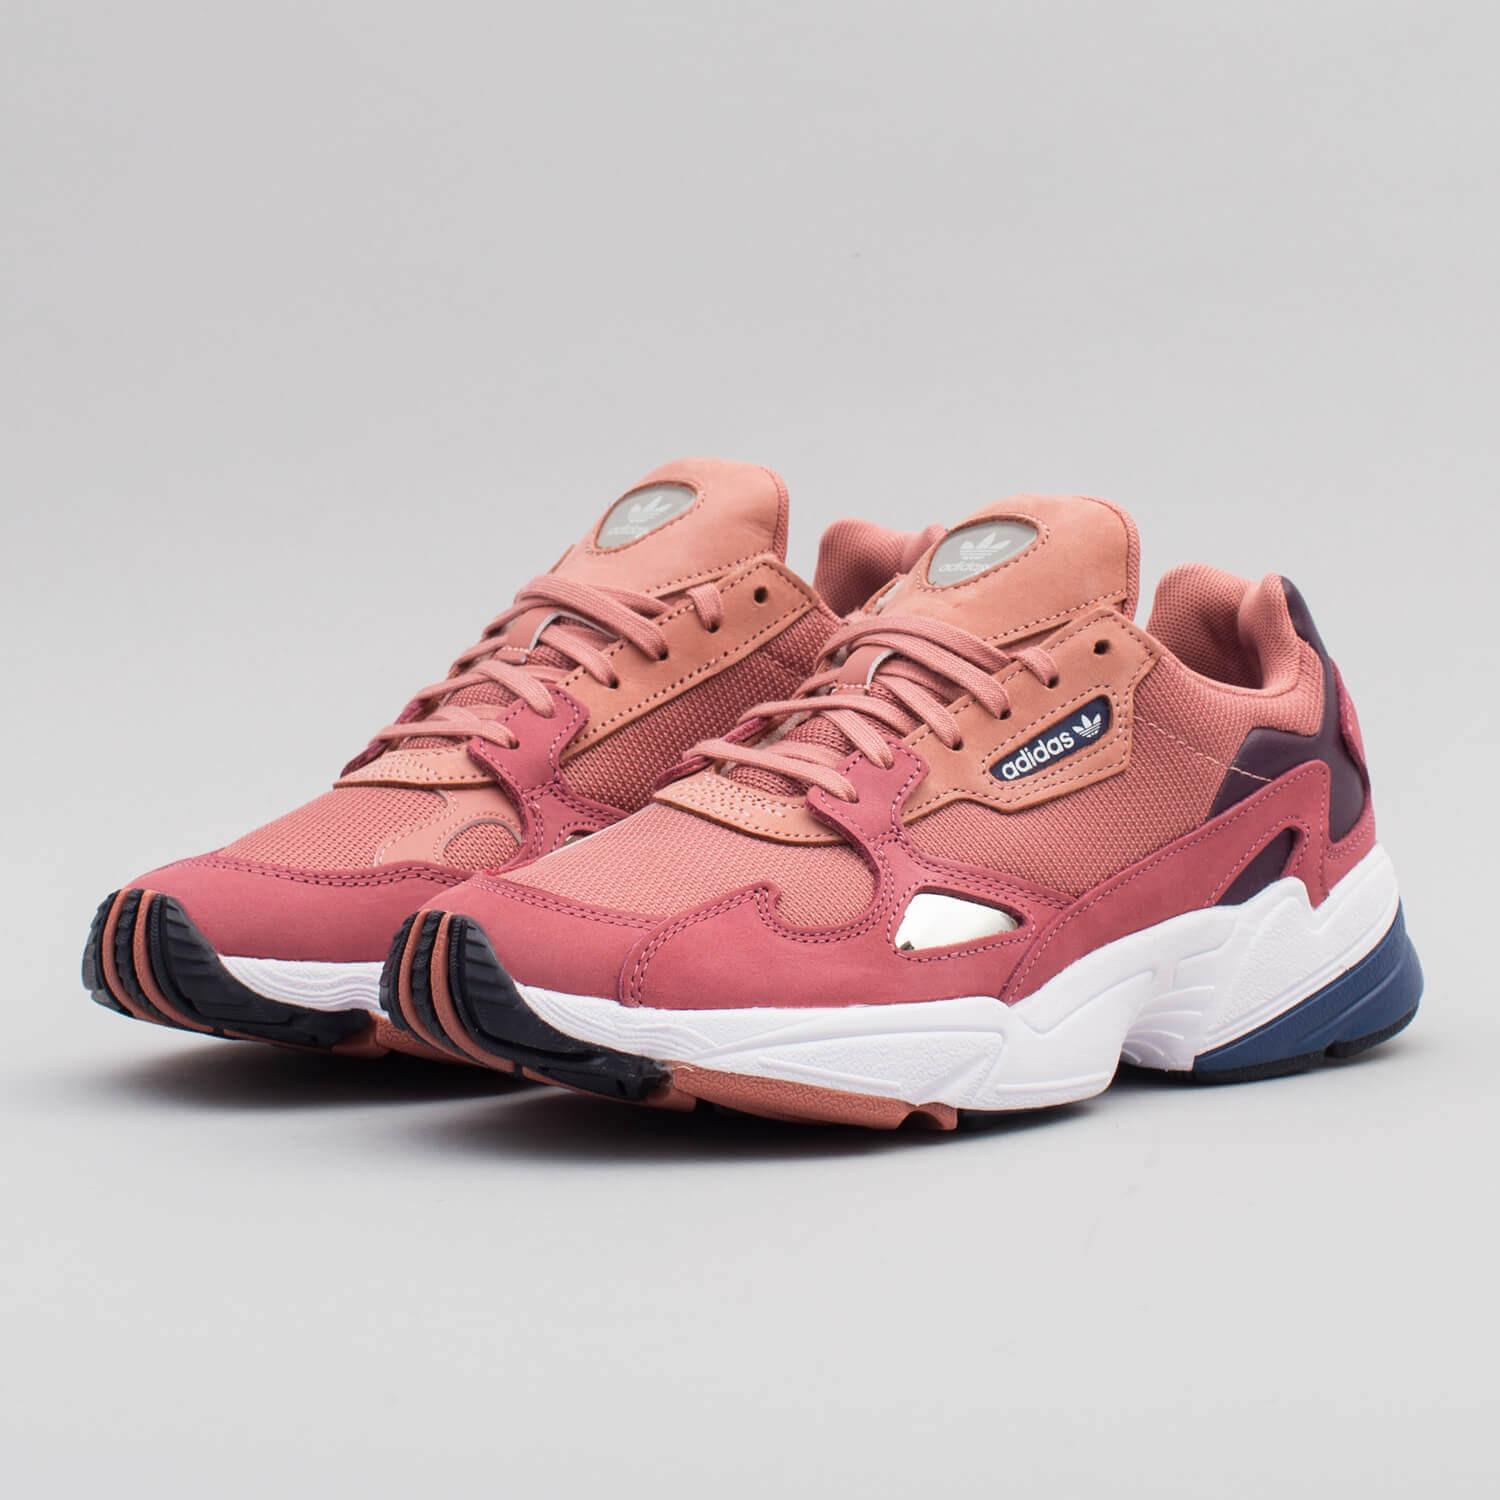 Giày Thể Thao Adidas Falcon Raw Pink D96700 Size 37 1